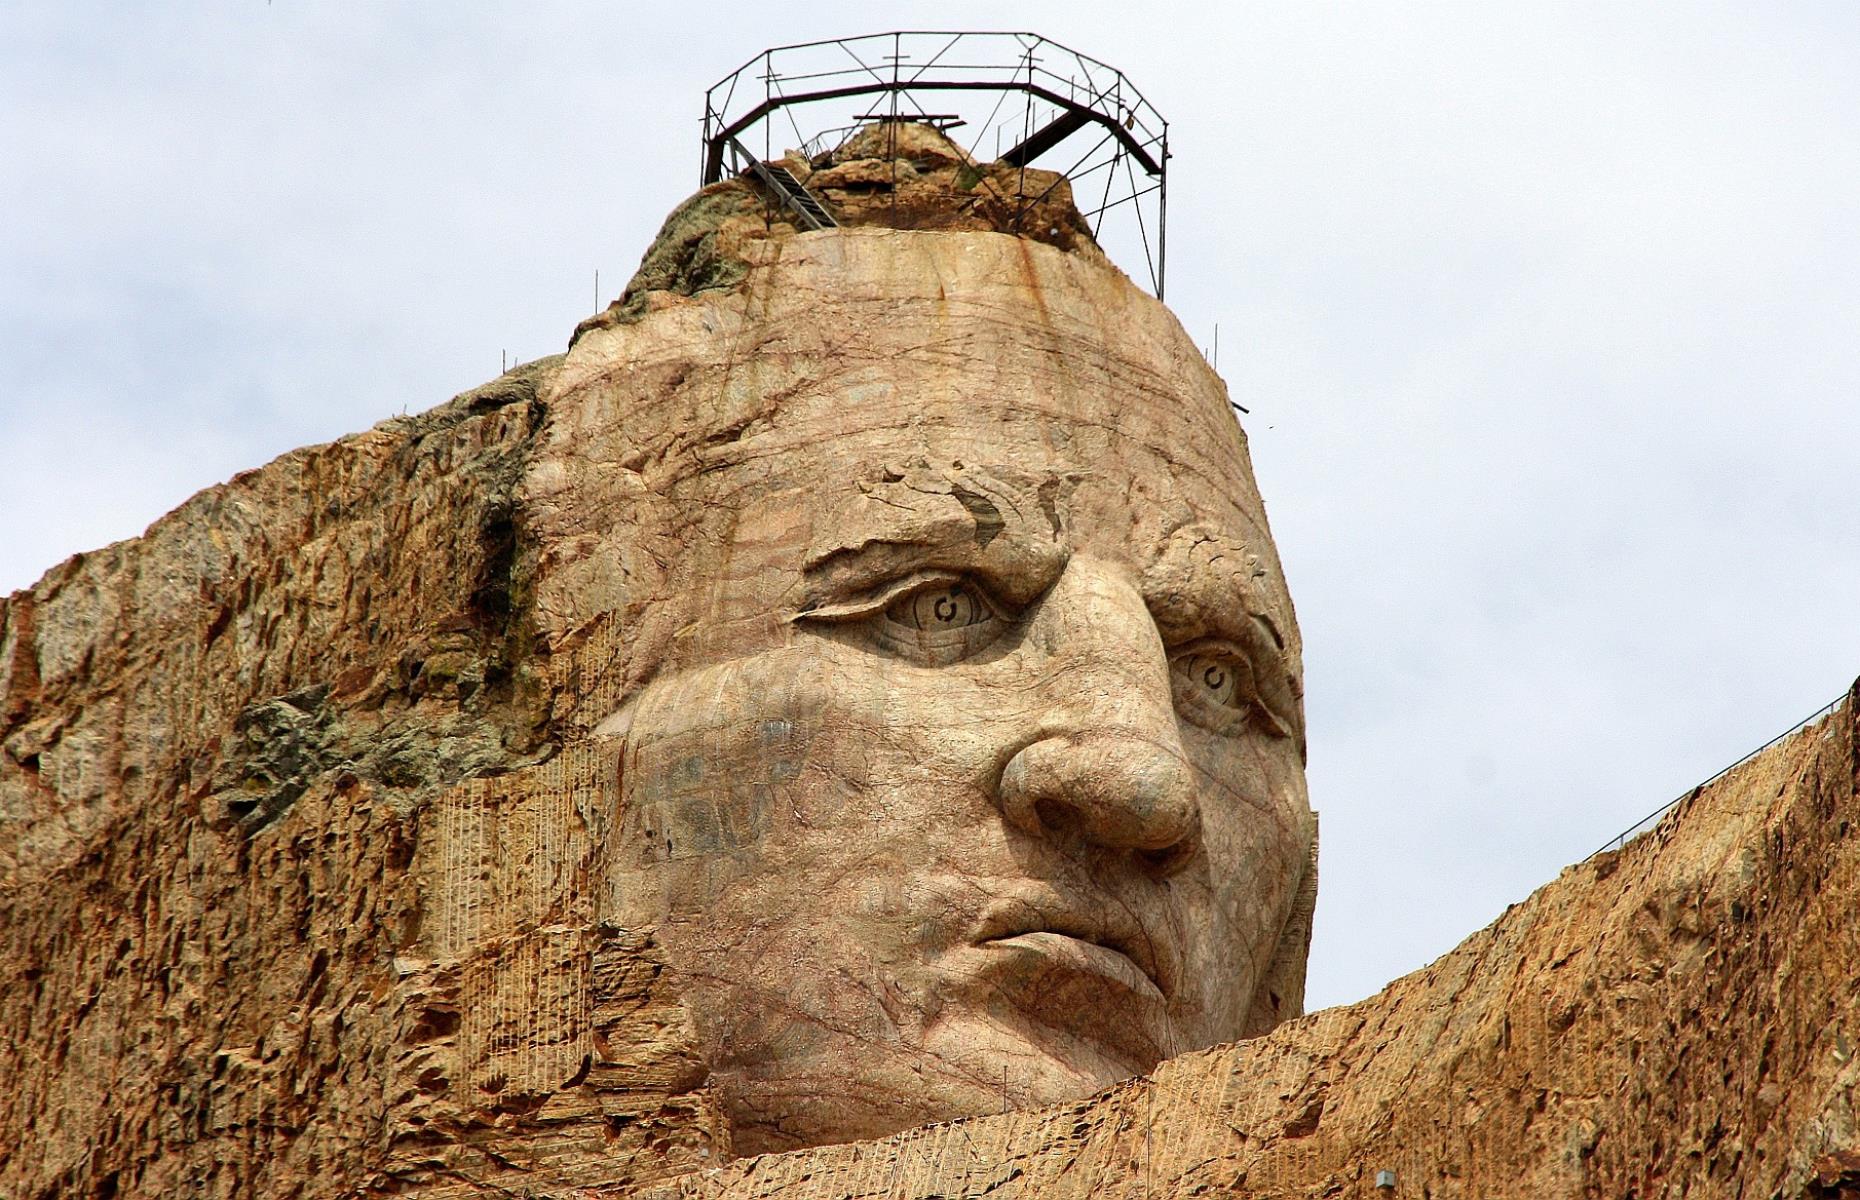 <p>This giant mountain sculpture, still under construction, is tipped to be the world’s largest upon completion. The tribute in the Black Hills of South Dakota depicts Crazy Horse, the Sioux warrior who fought against white Americans threatening the traditions and territory of his people. The monument is set to be a gargantuan 563-feet (1,847m) high once finished. Discover more of <a href="https://www.loveexploring.com/galleries/82867/the-worlds-most-jaw-dropping-sculptures-and-statues">the world's jaw-dropping sculptures and statues here</a>.</p>